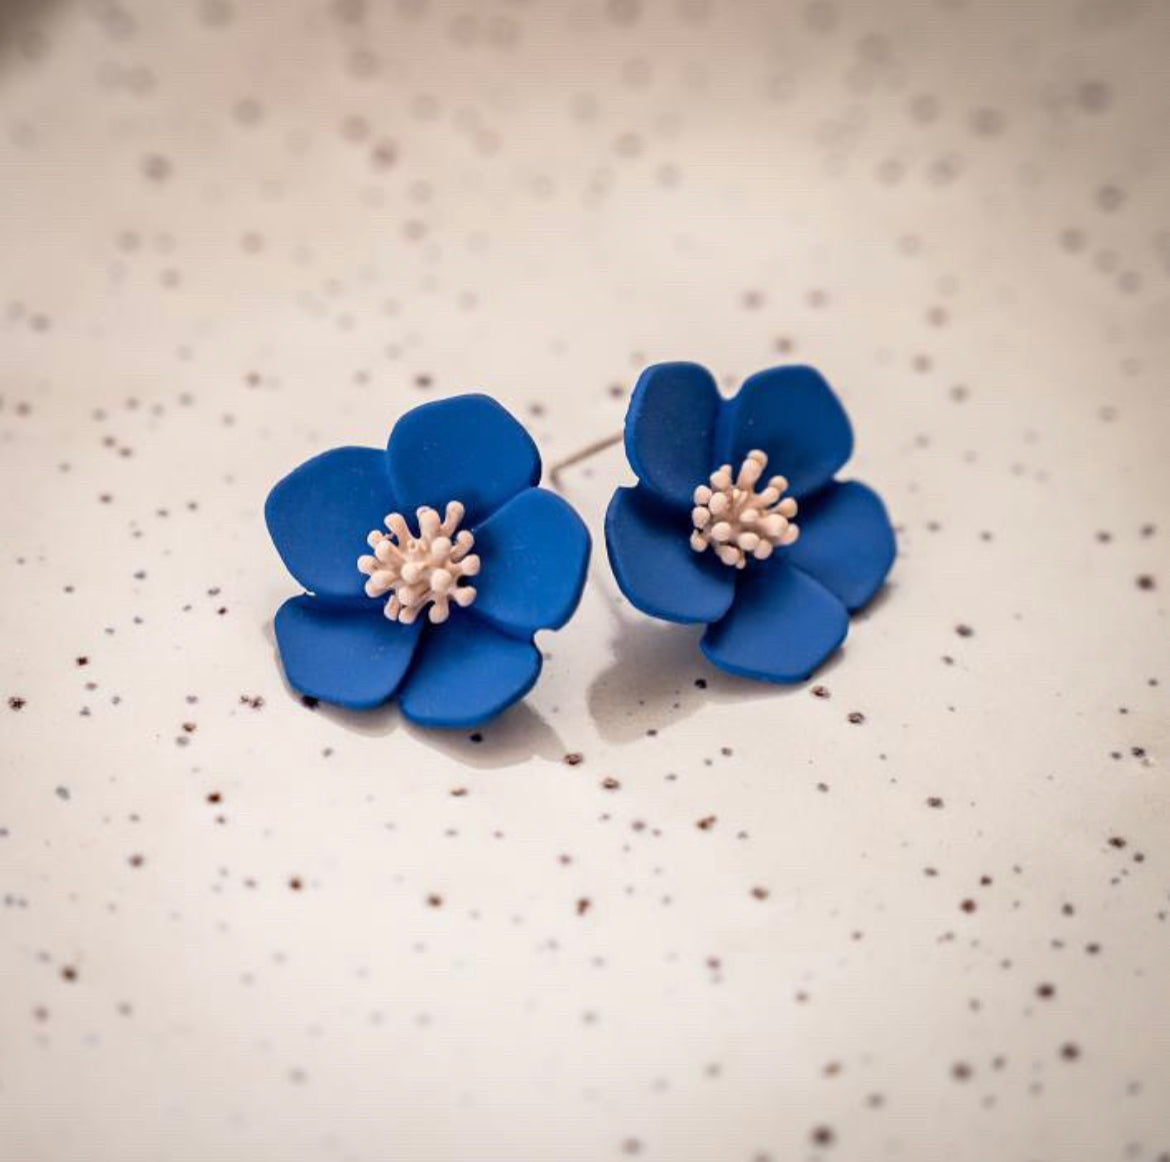 Small Flower Earrings Blue and White